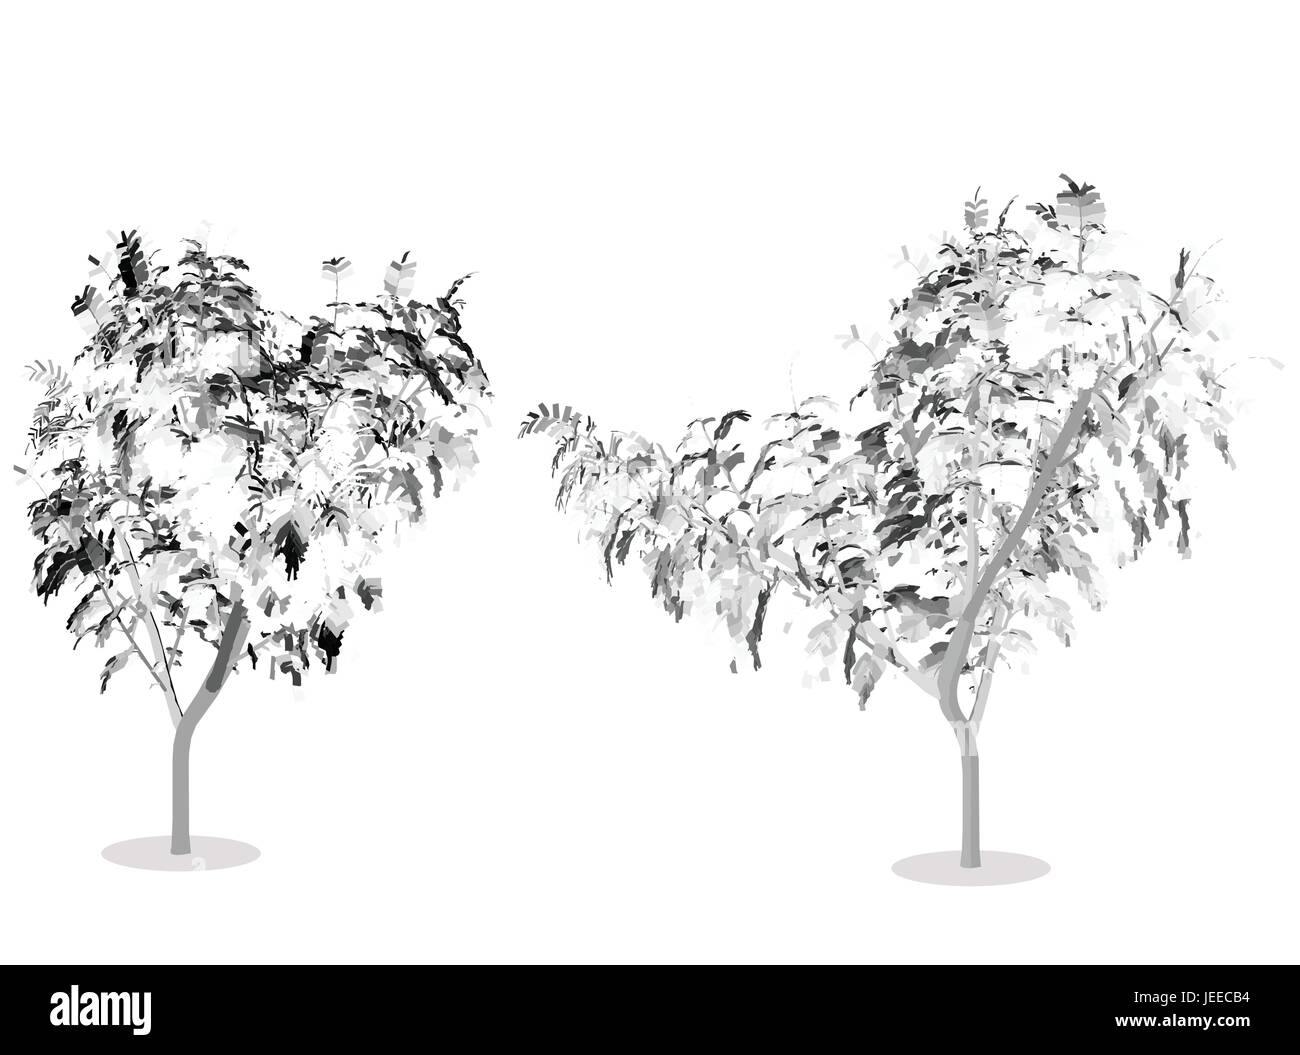 EPS 10 vector illustration of tree, plant silhouette Stock Vector